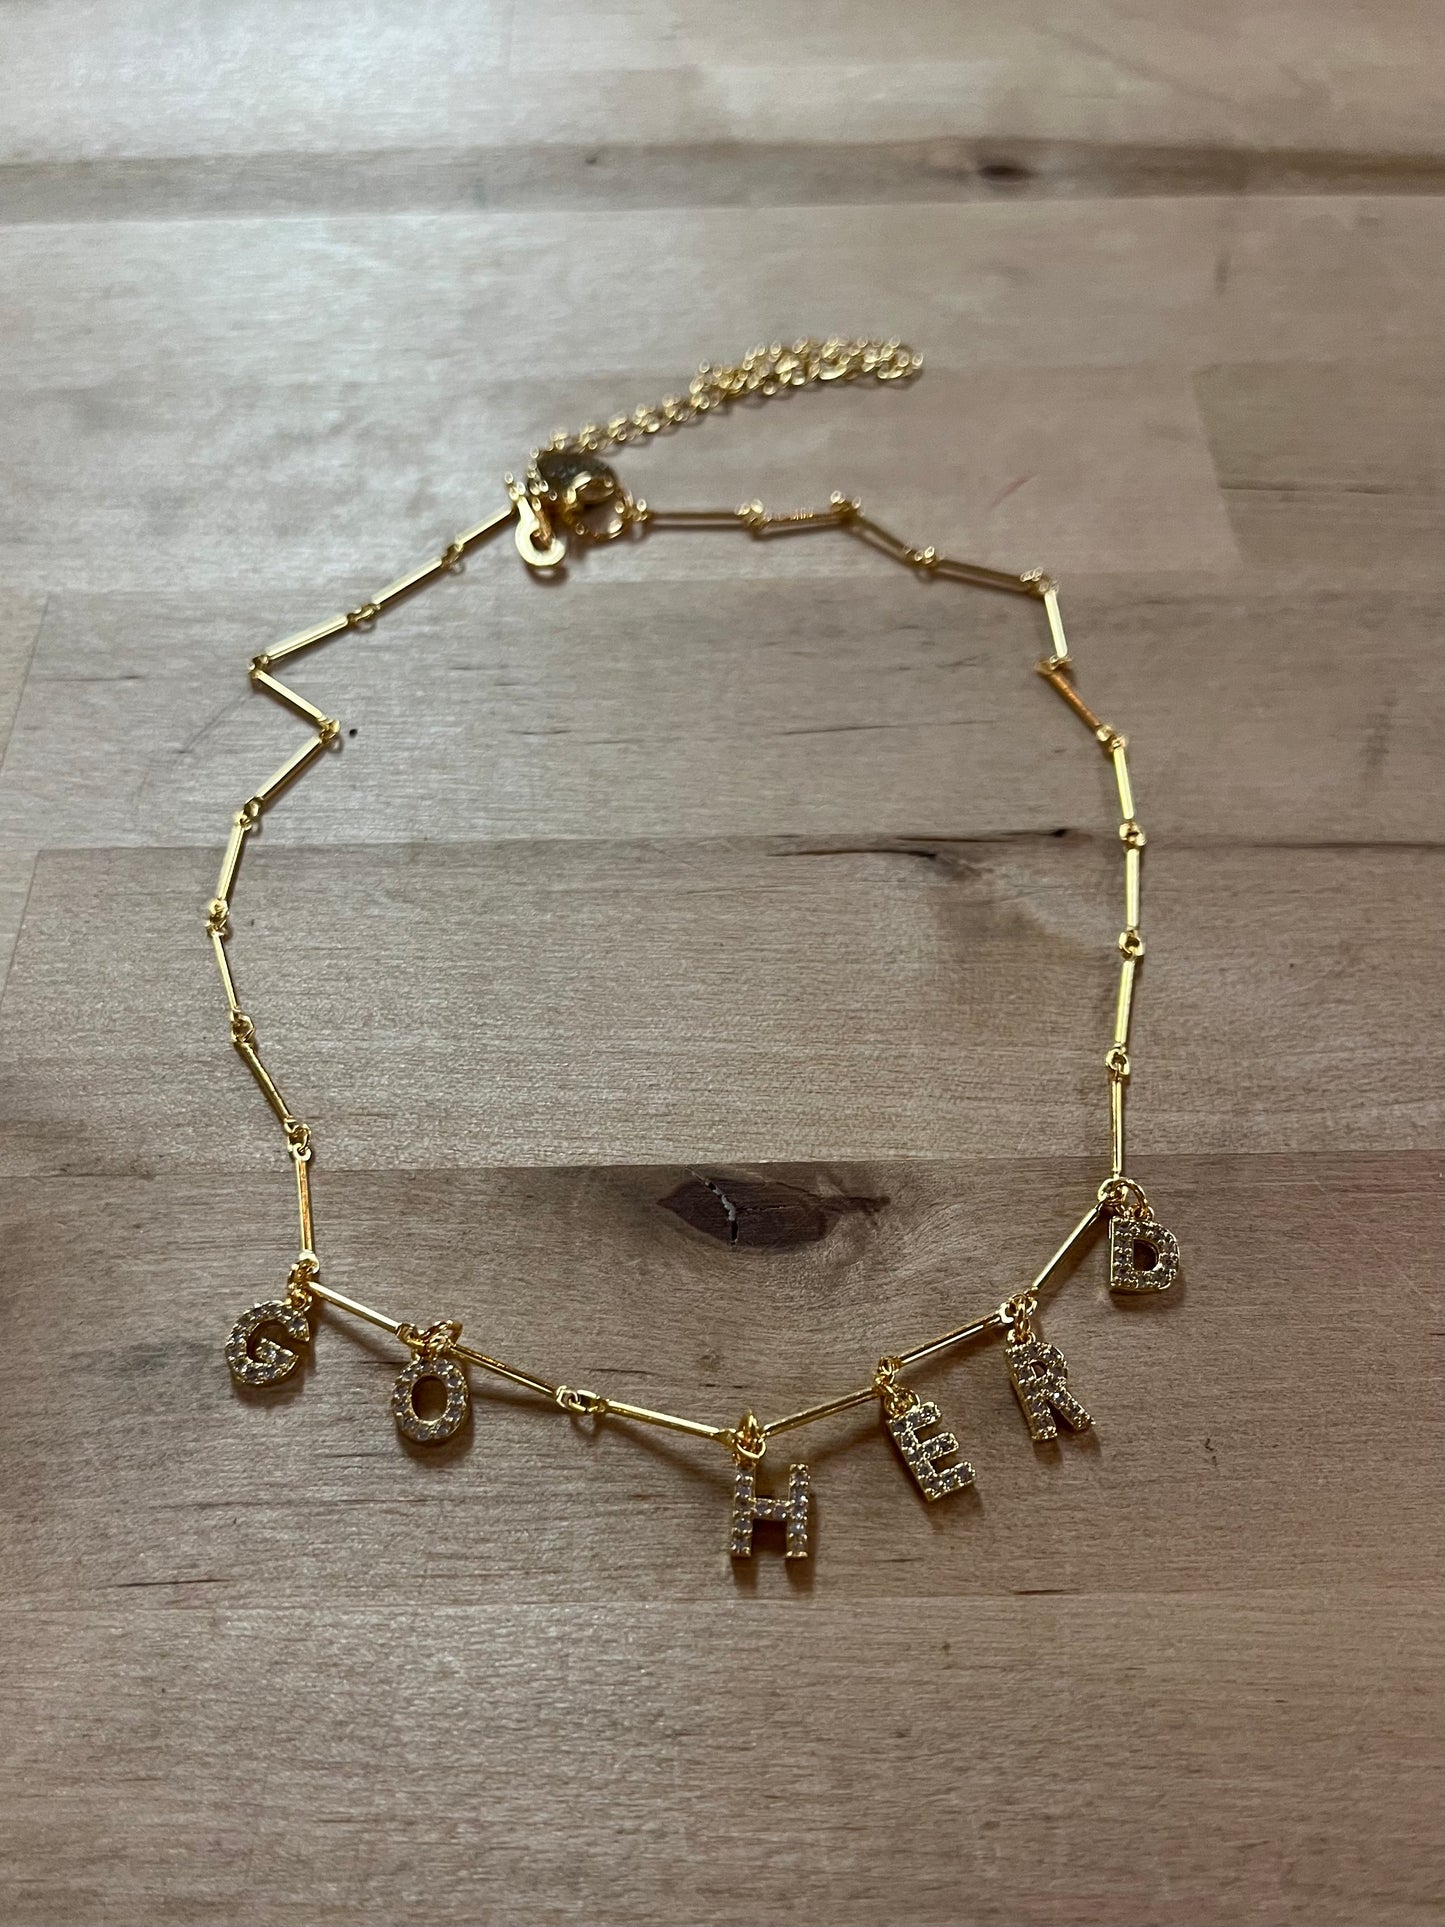 The Complete Charm Bracelet! Comes in your choice of gold & diamond color  plus of course you get to select any initial you'd like 💀�... | Instagram